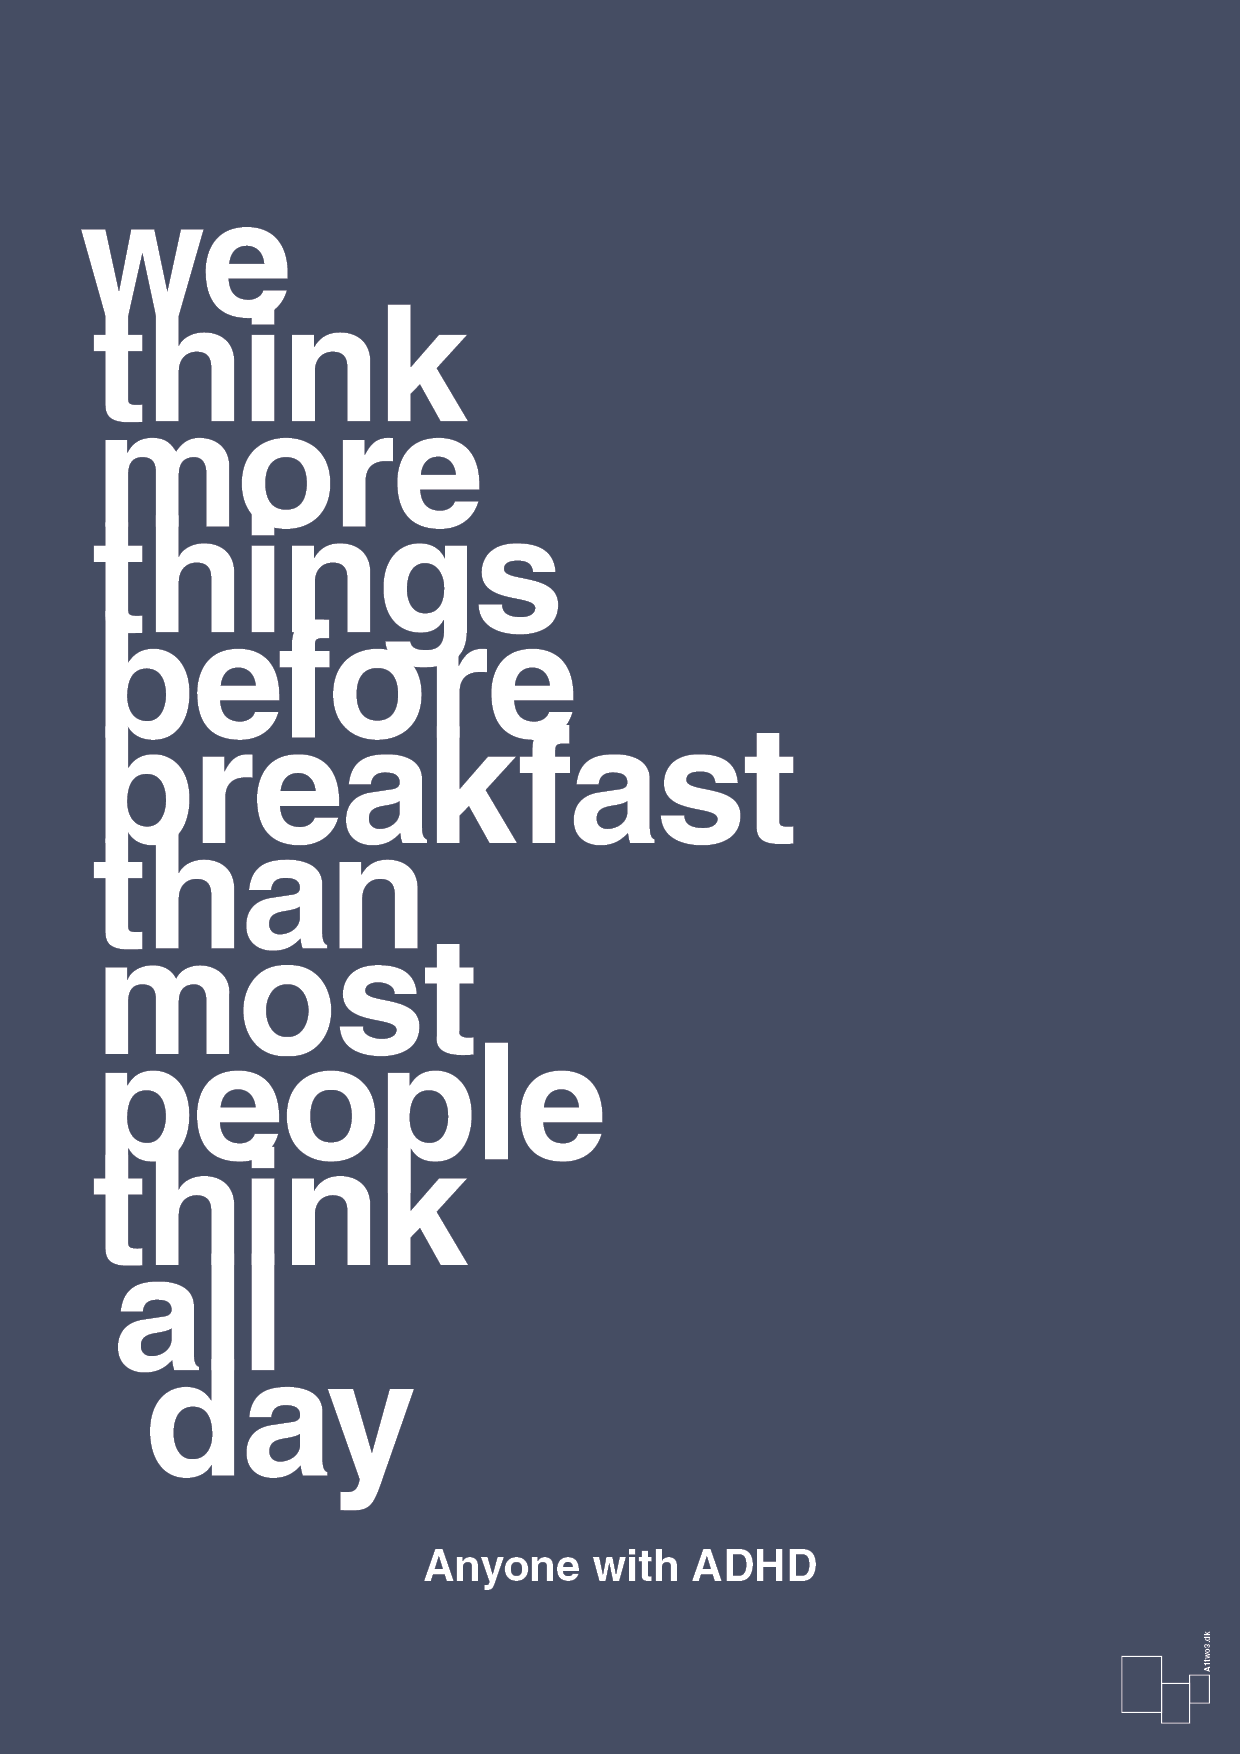 we think more things before breakfast than most people think all day - Plakat med Samfund i Petrol